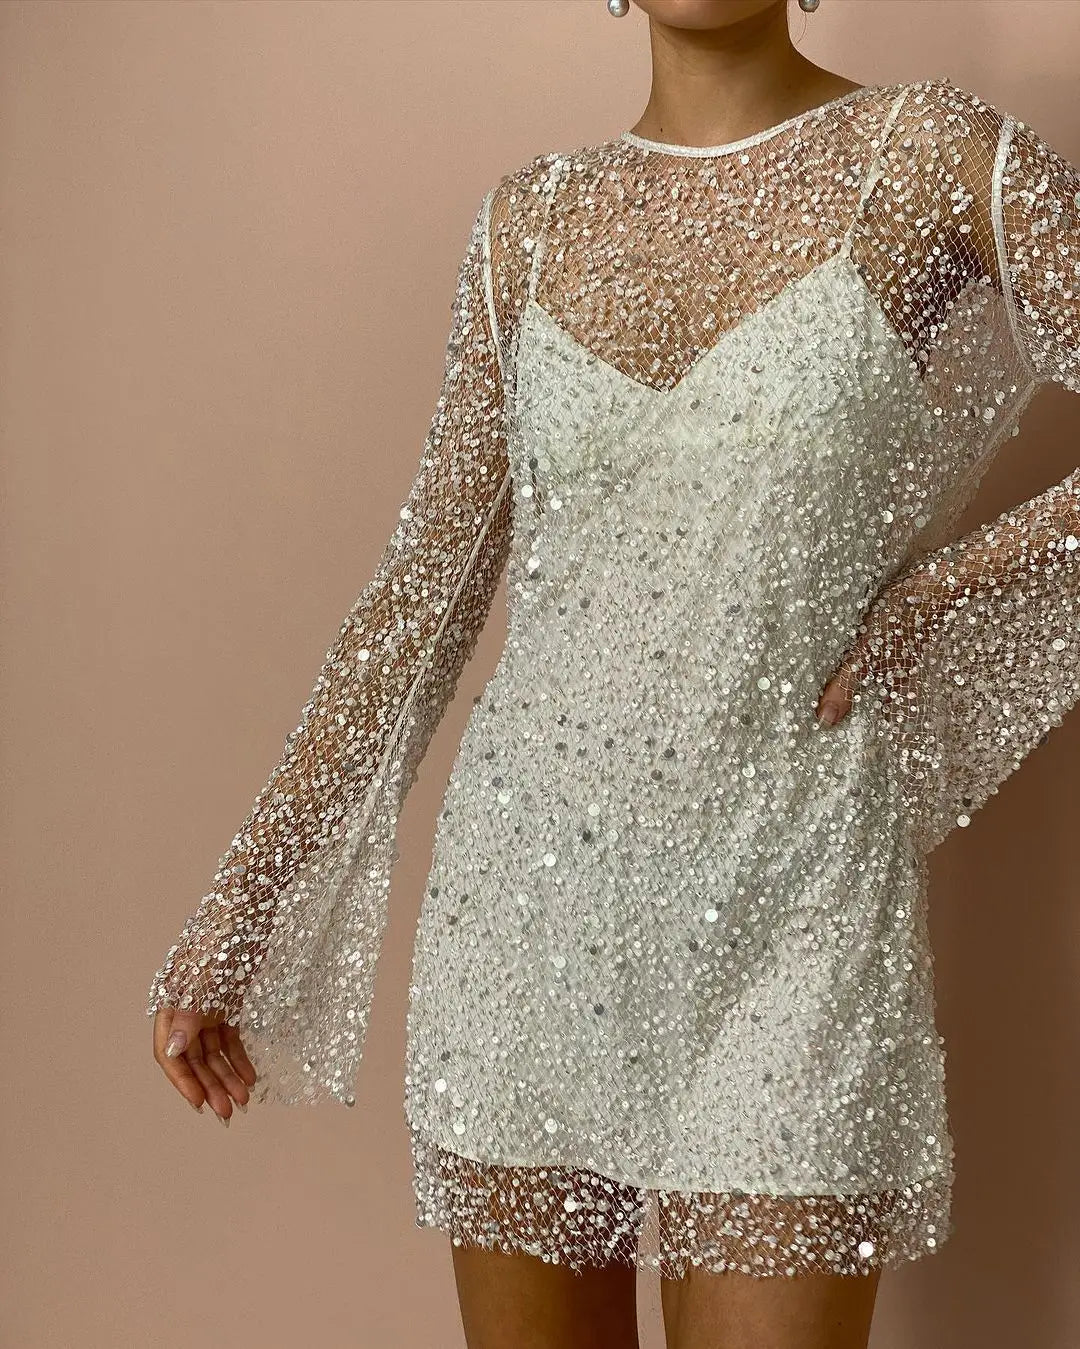 Sequin Mesh Dress - Elegance With a Sultry Twist